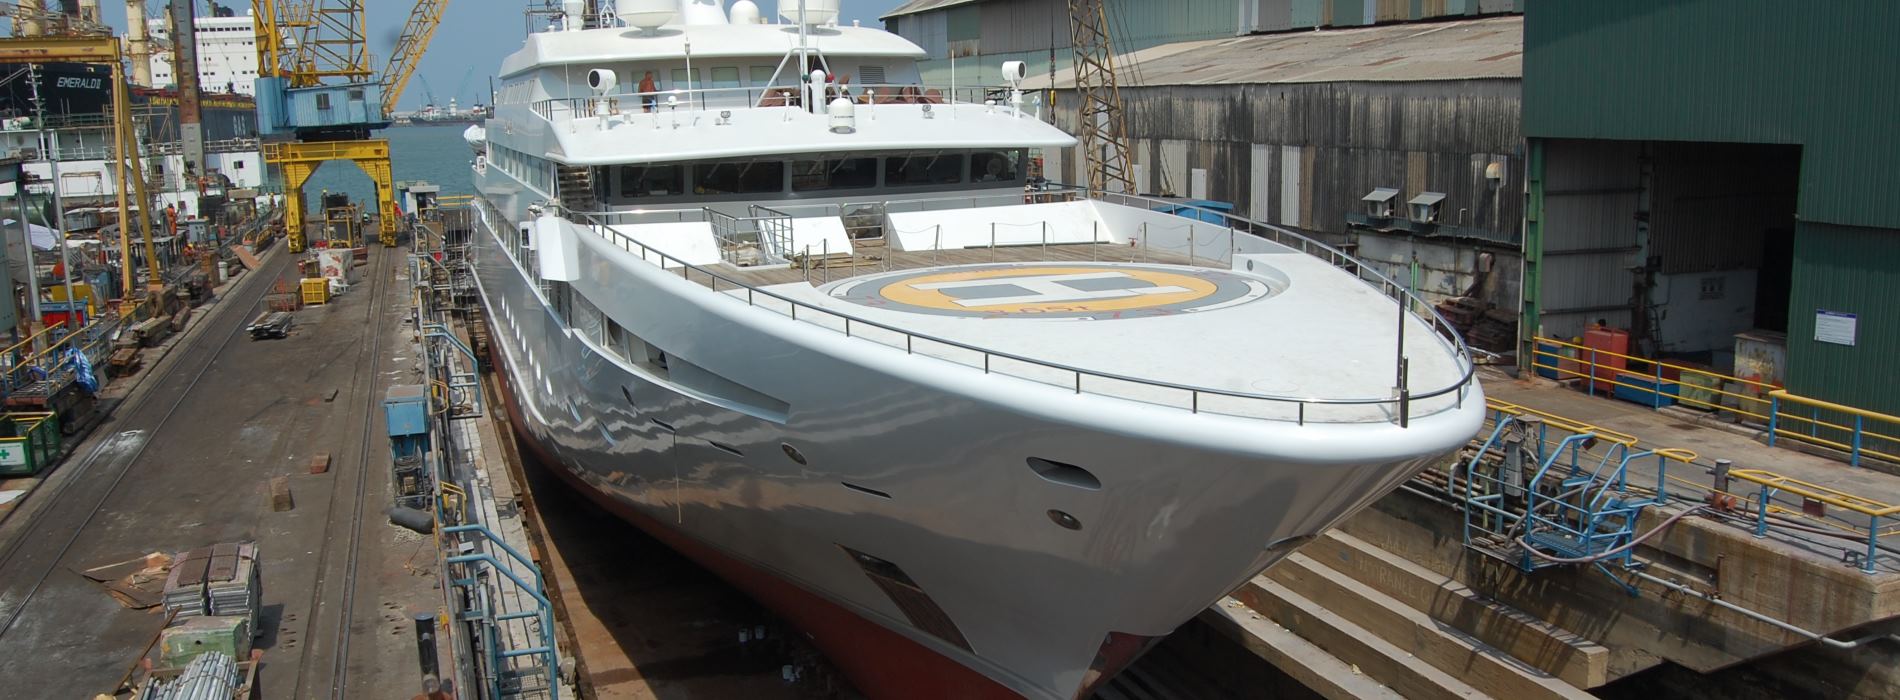 GULF CRAFT LAUNCHES WORLD’S LARGEST COMPOSITE YACHT